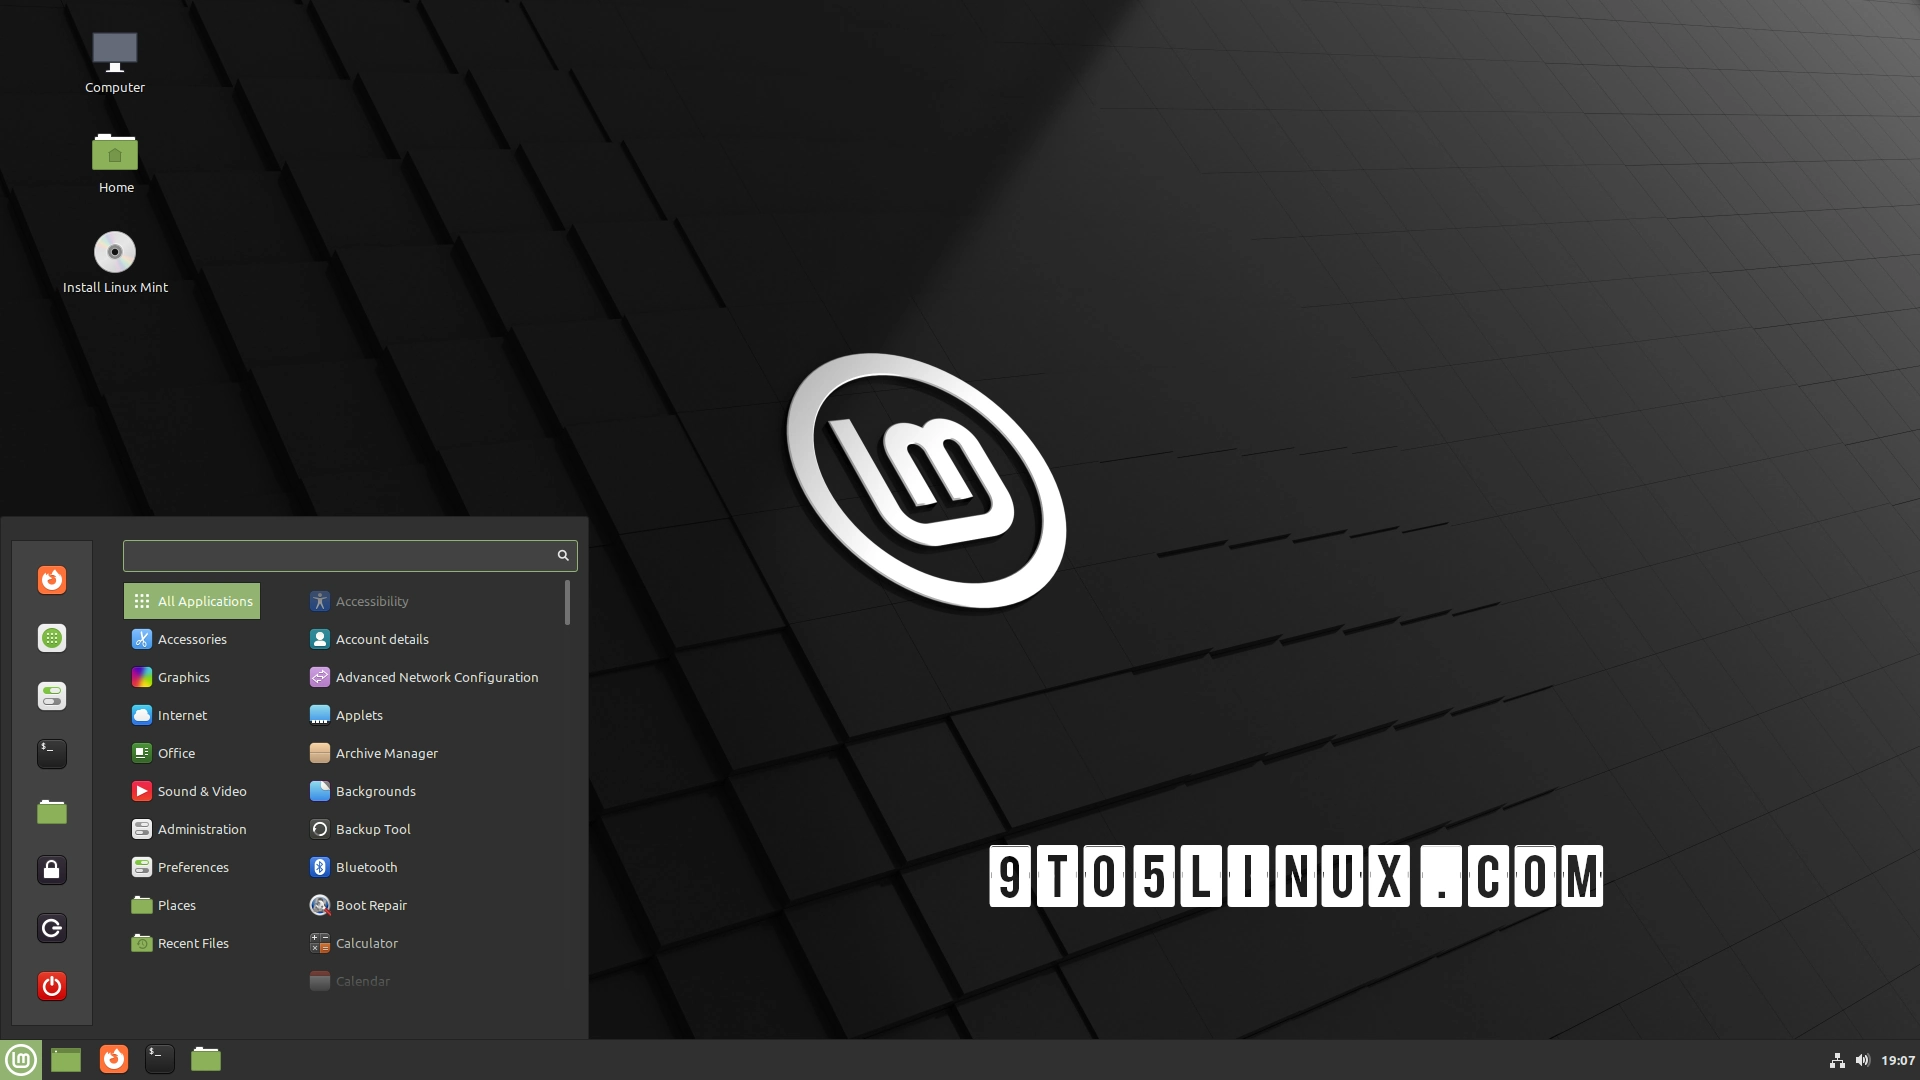 Linux Mint 22 Codenamed “Wilma”, Will Be Based on Ubuntu 24.04 LTS